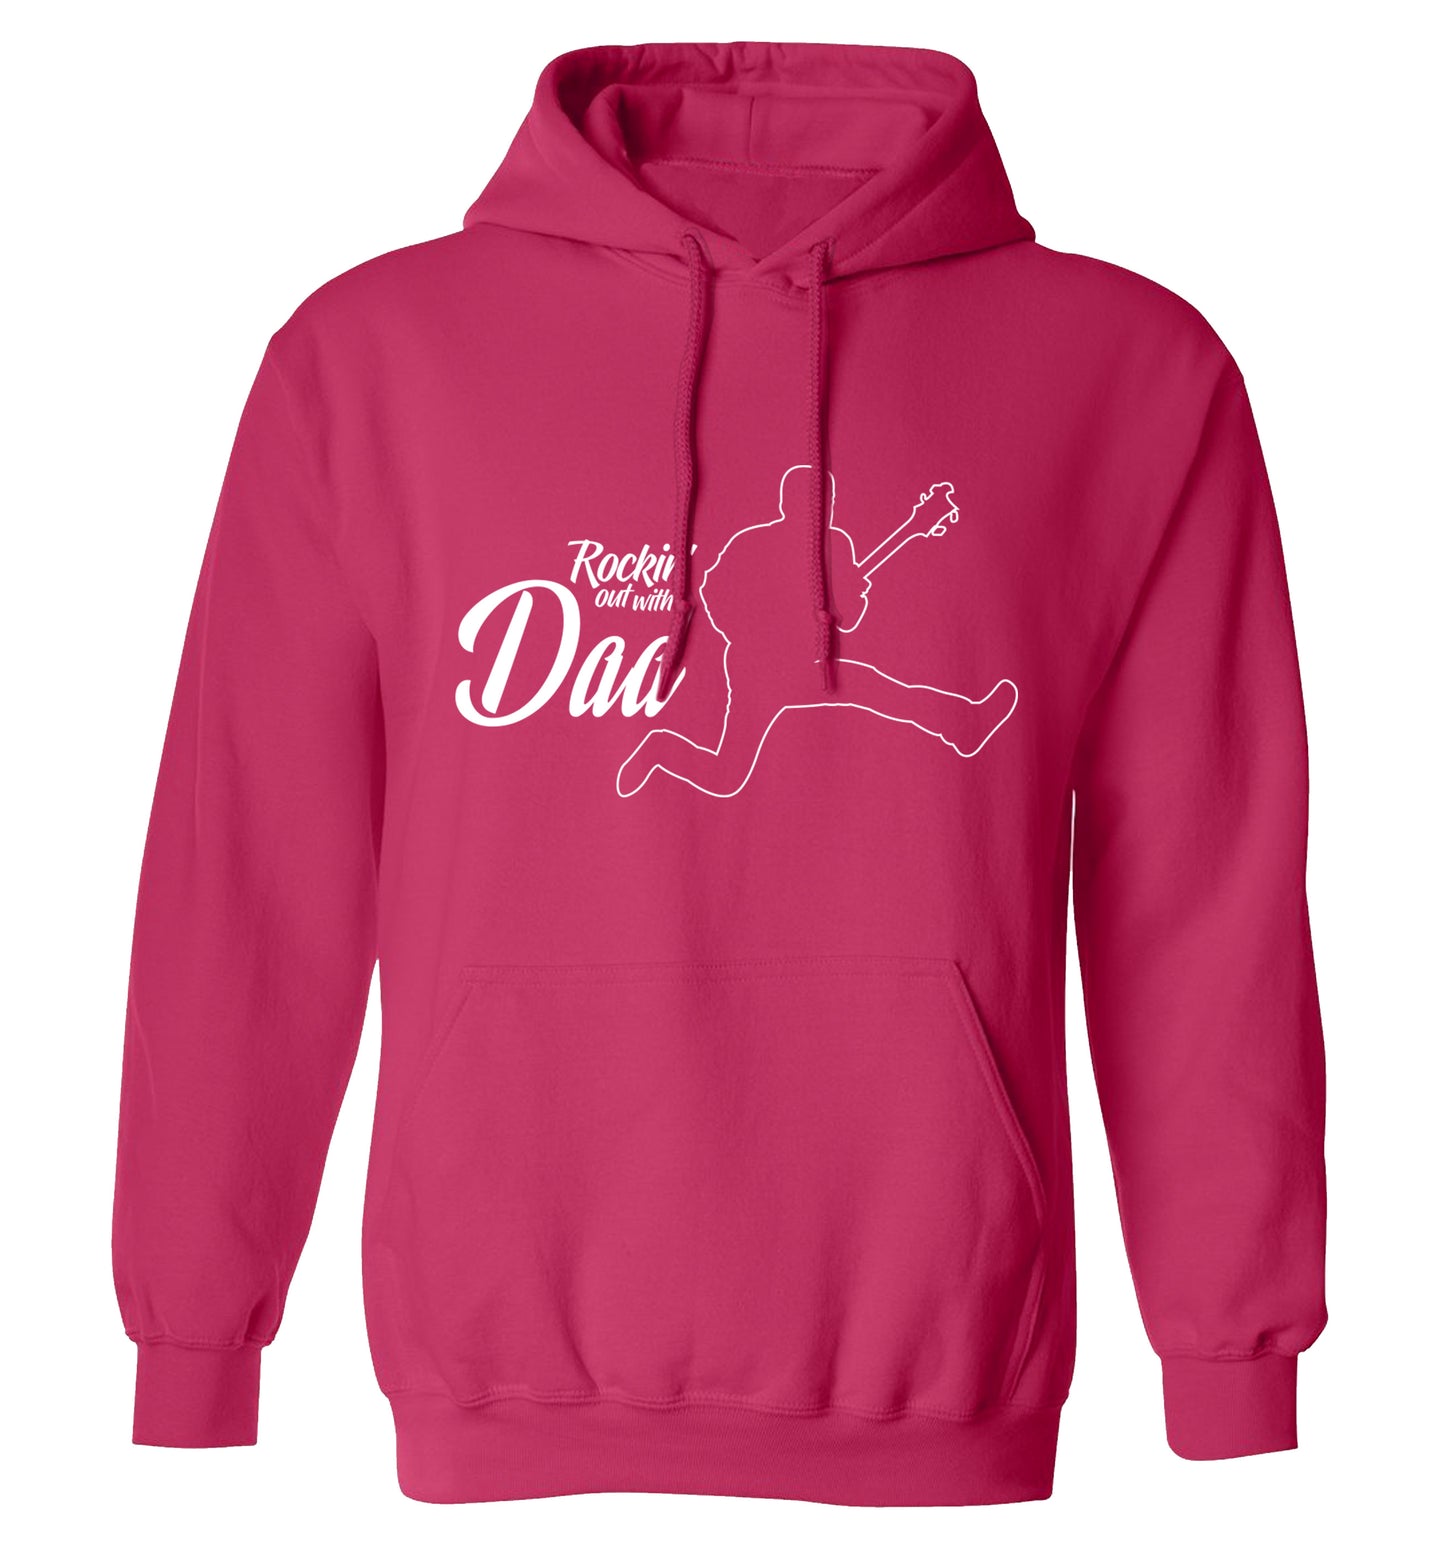 Rockin out with dad adults unisex pink hoodie 2XL